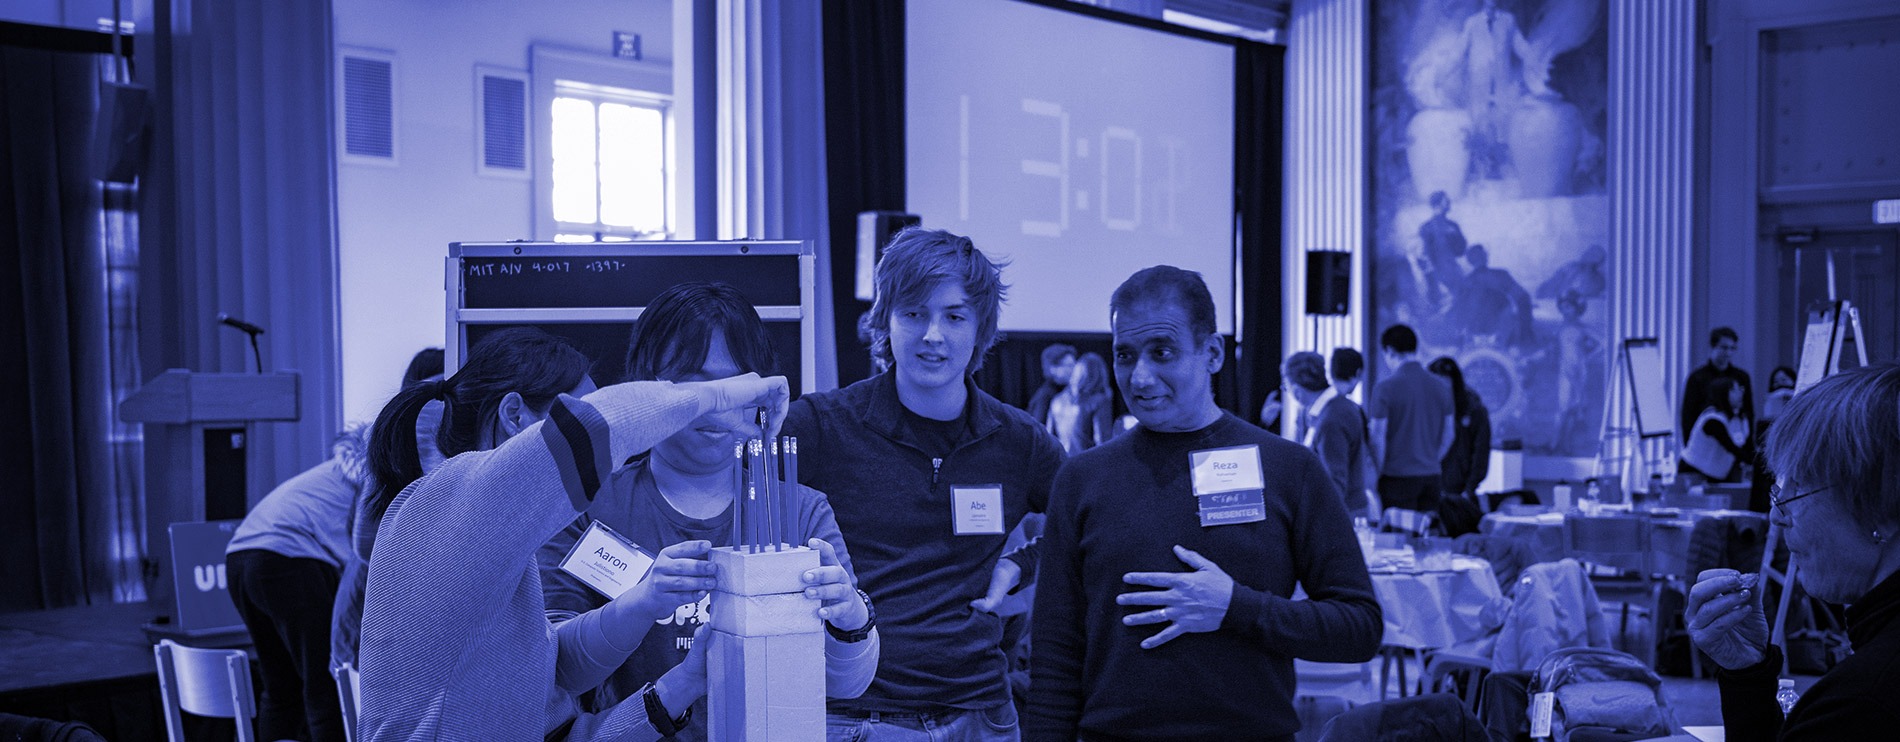 Mentor and students interacting at a UPOP event